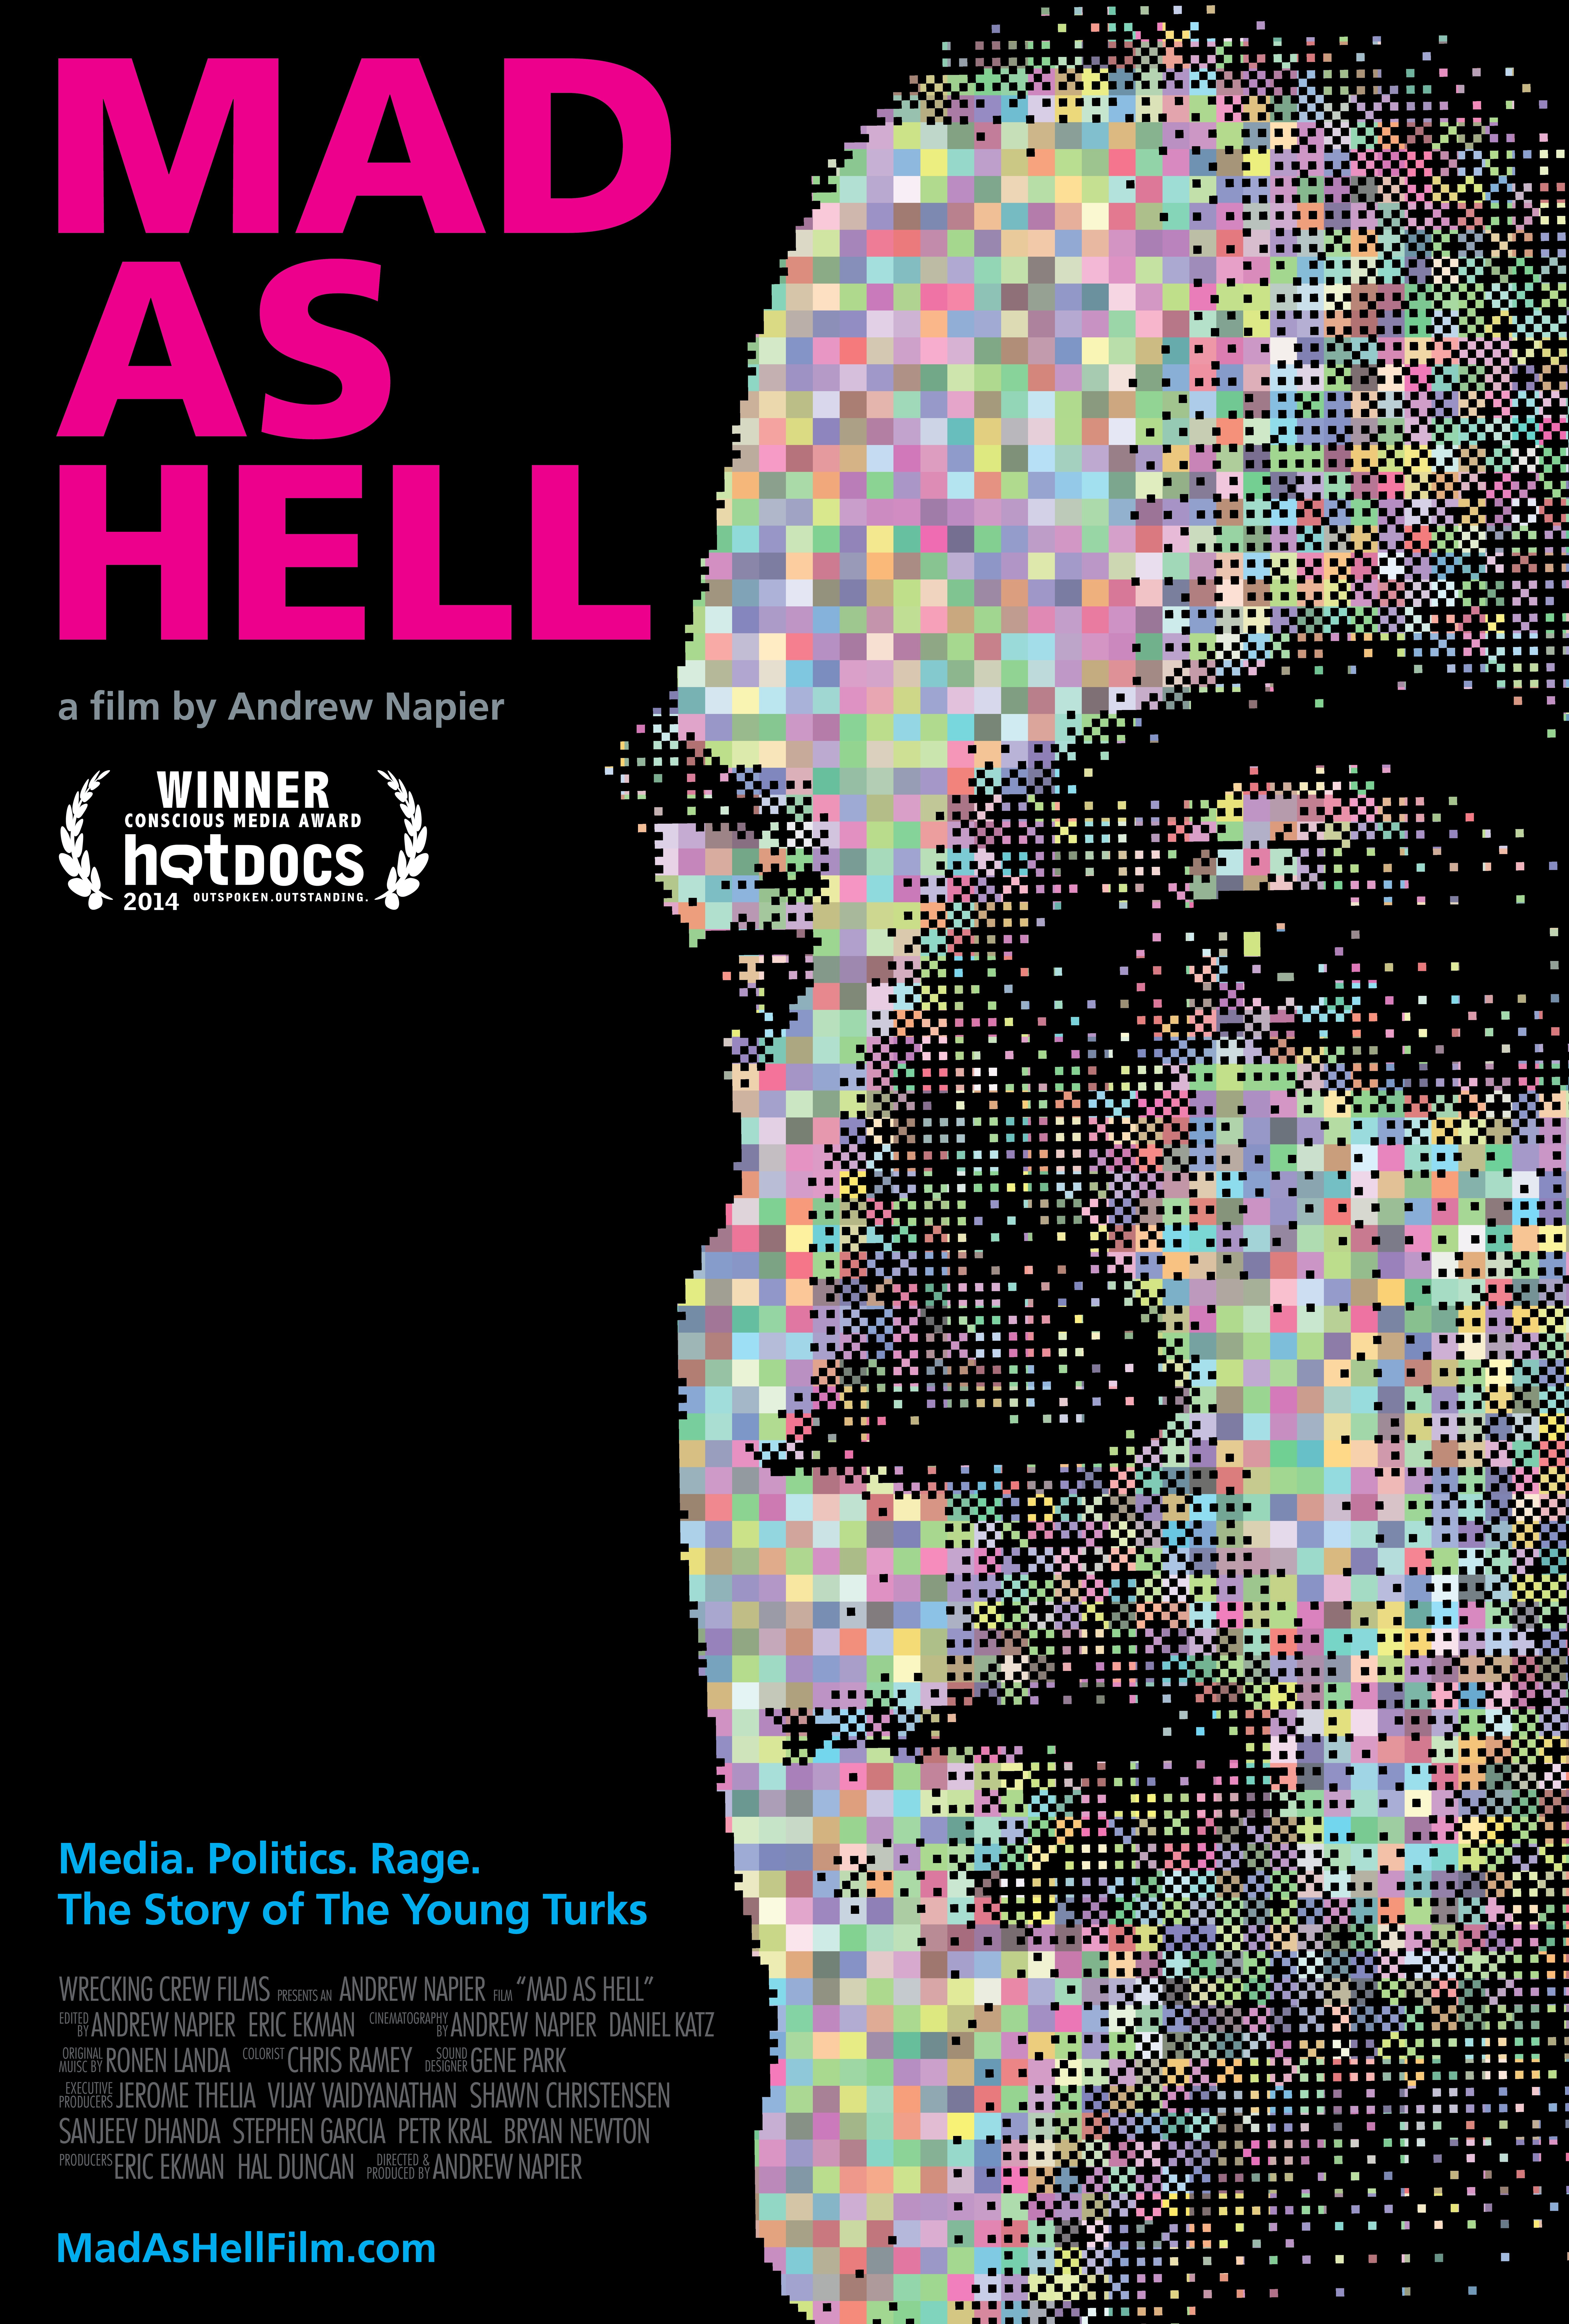 Poster for 'Mad As Hell'. Designed by Amanda Tannen.